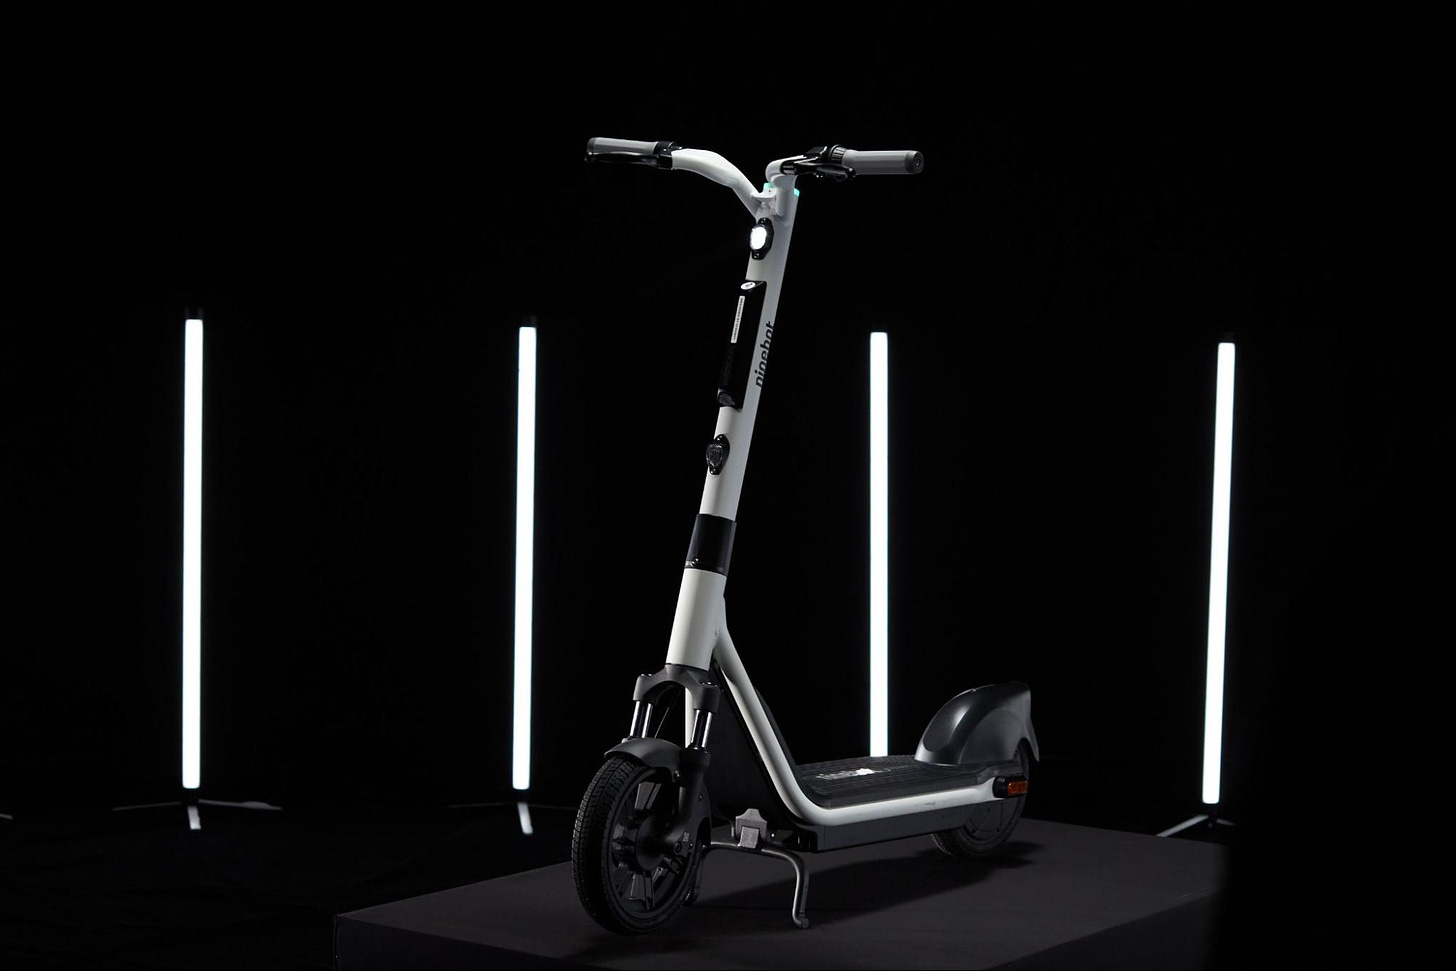 Lite L60E: Segway's safest, most efficient and affordable shared e-scooter